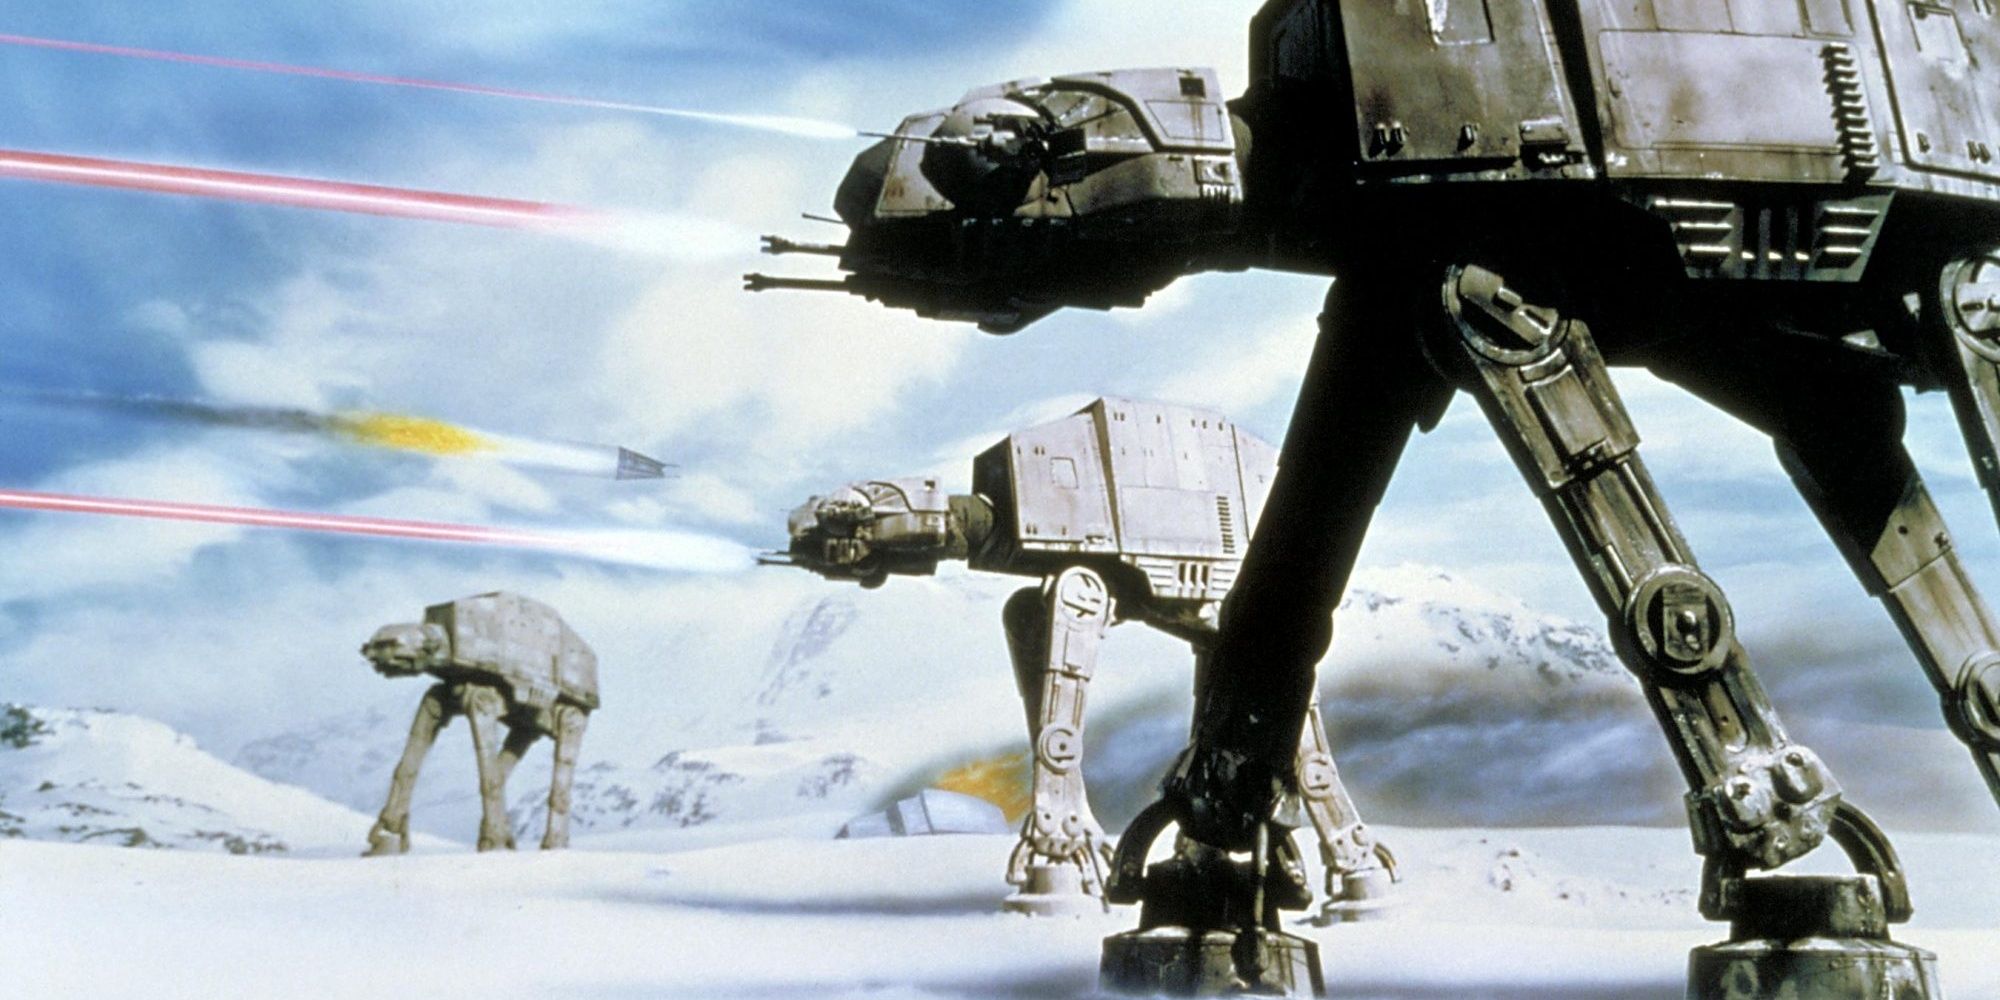 The Hoth battle in The Empire Strikes Back